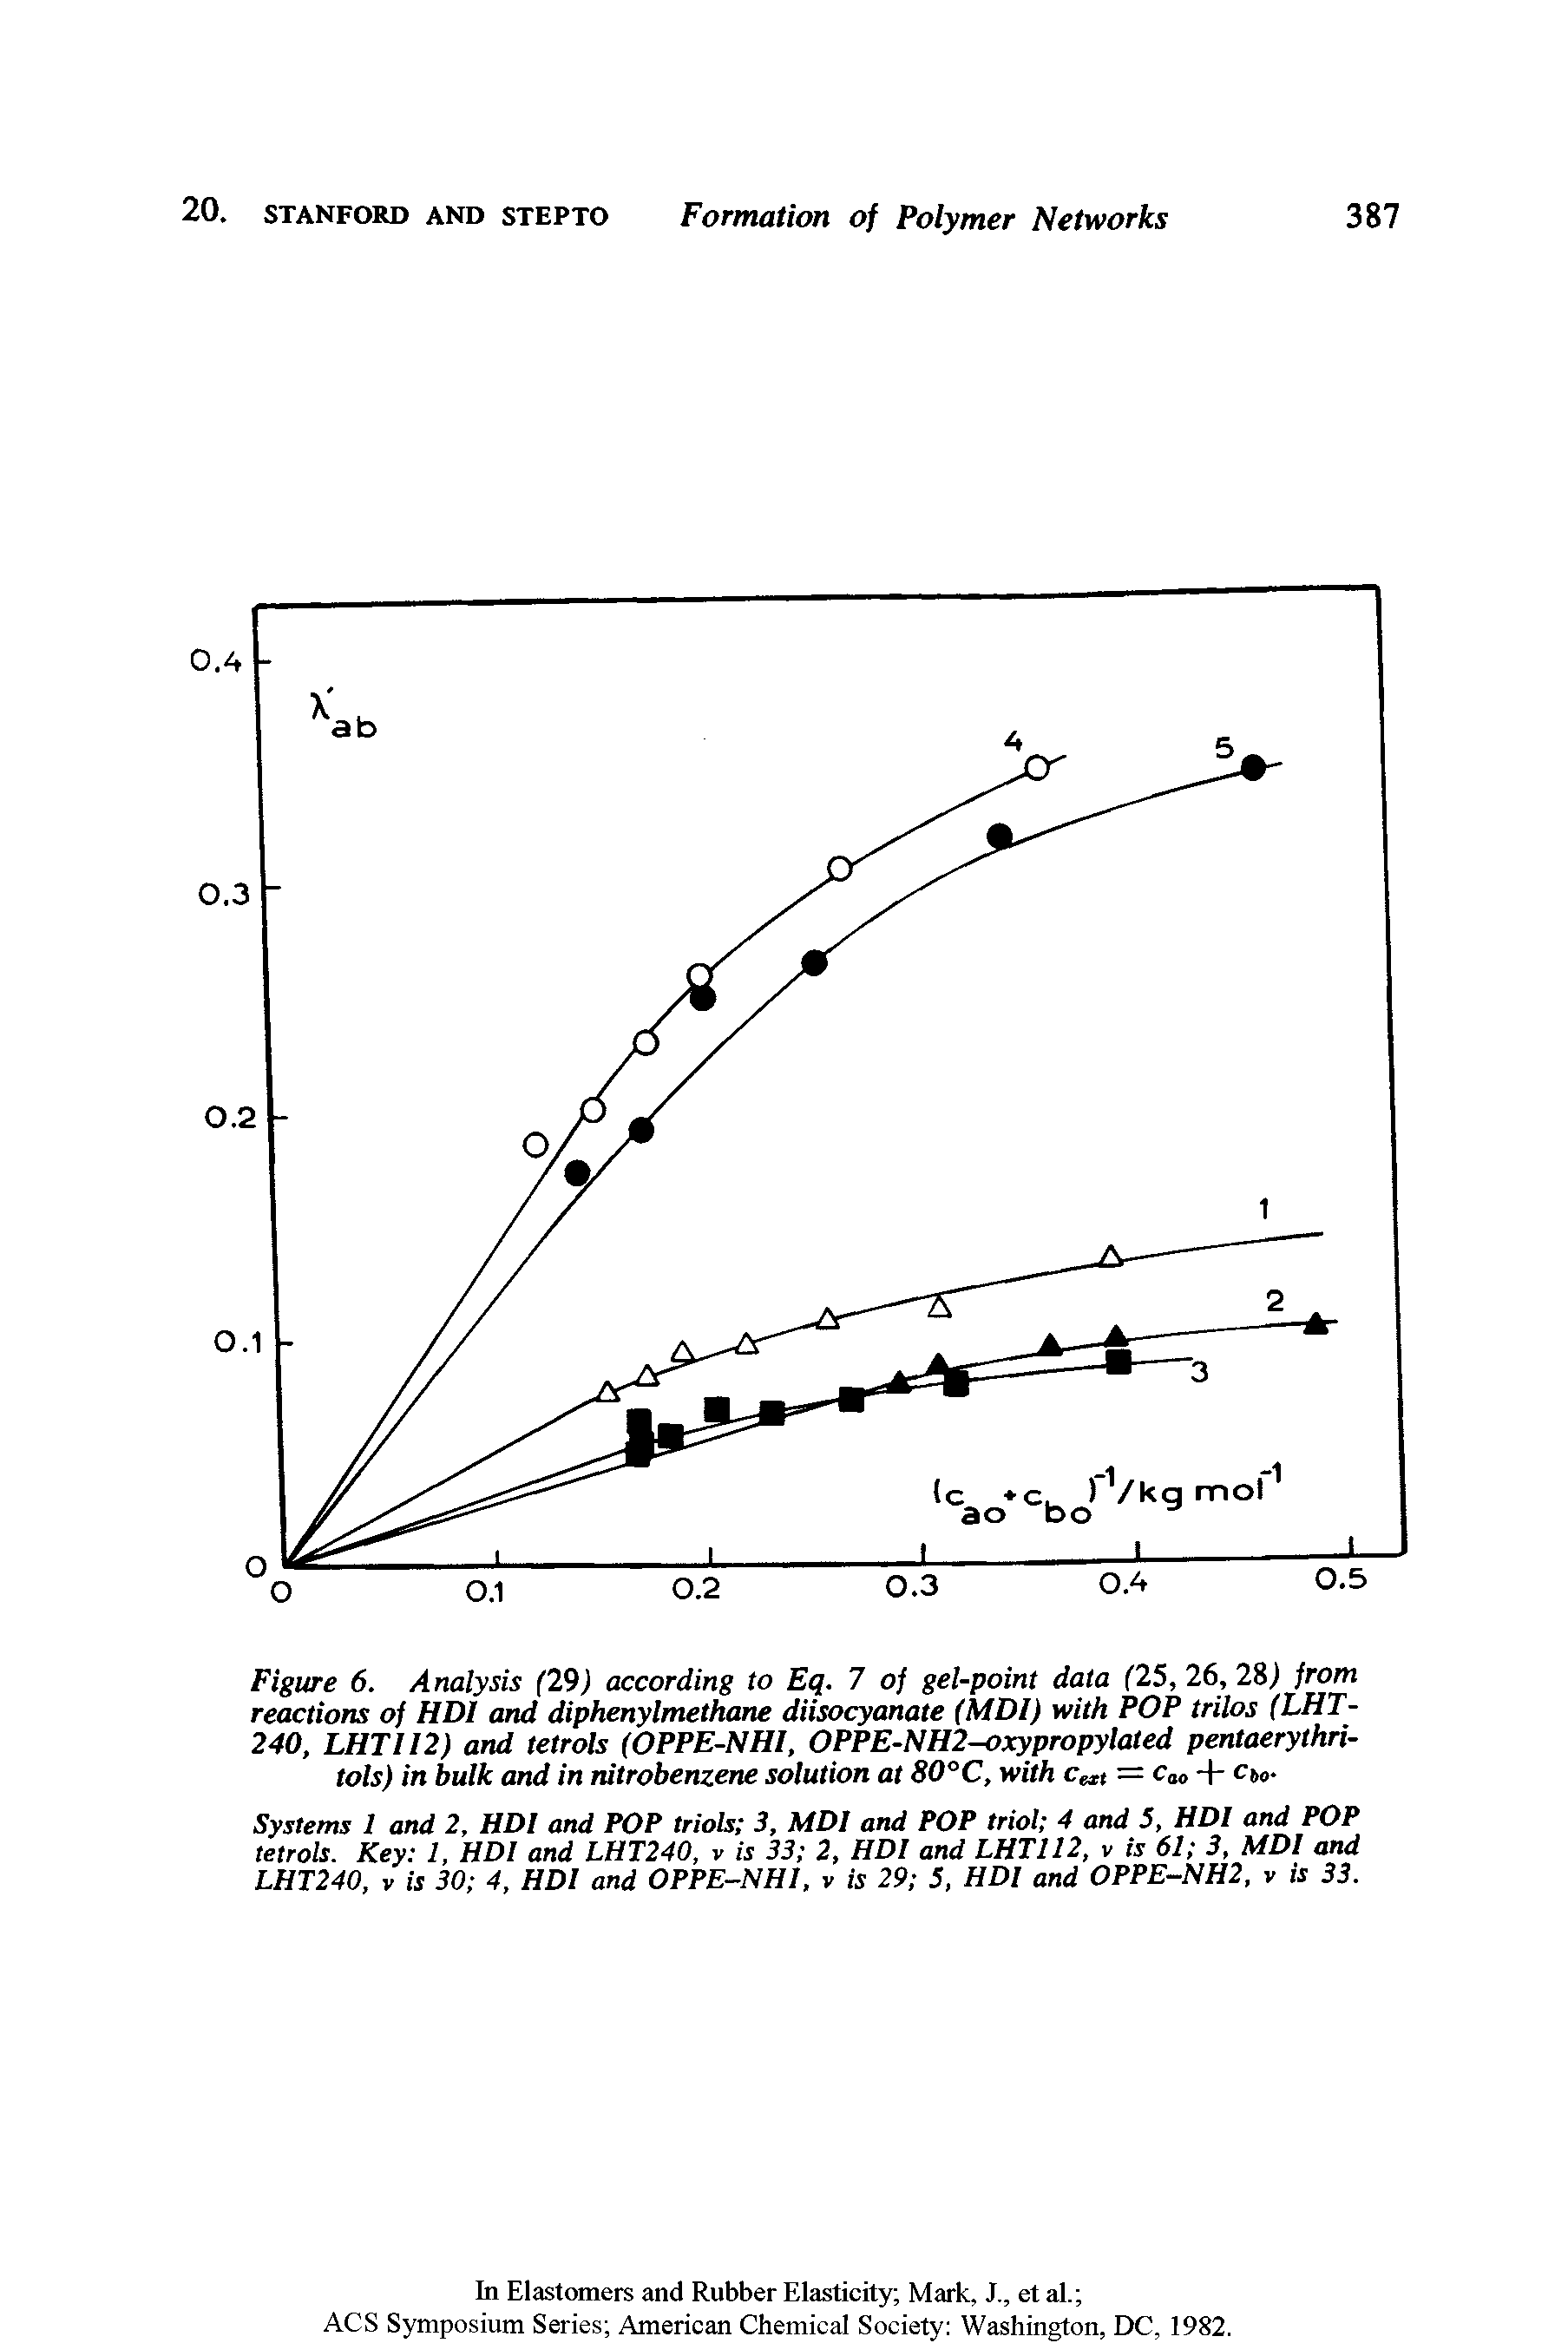 Figure 6. Analysis (29) according to Eq. 7 of gel-point data (25, 26, 28) from reactions of HDI and diphenylmethane diisocyanate (MDl) with POP trilos (LHT-240, LHTII2) and tetrols (OPPE-NHI, OPPE-NH2-oxypropylated pentaerythri-tols) in bulk and in nitrobenzene solution at 80°C, with cMt = cao + ecosystems 1 and 2, HDI and POP triols 3, MDl and POP triol 4 and 5, HDI and POP tetrols. Key 1, HDI and LHT240, is 33 2, HDI and LHTII2, v is 61 3, MDl and LHT240, v is 30 4, HDI and OPPE-NHI, v is 29 S, HDI and OPPE-NH2, v is 33.